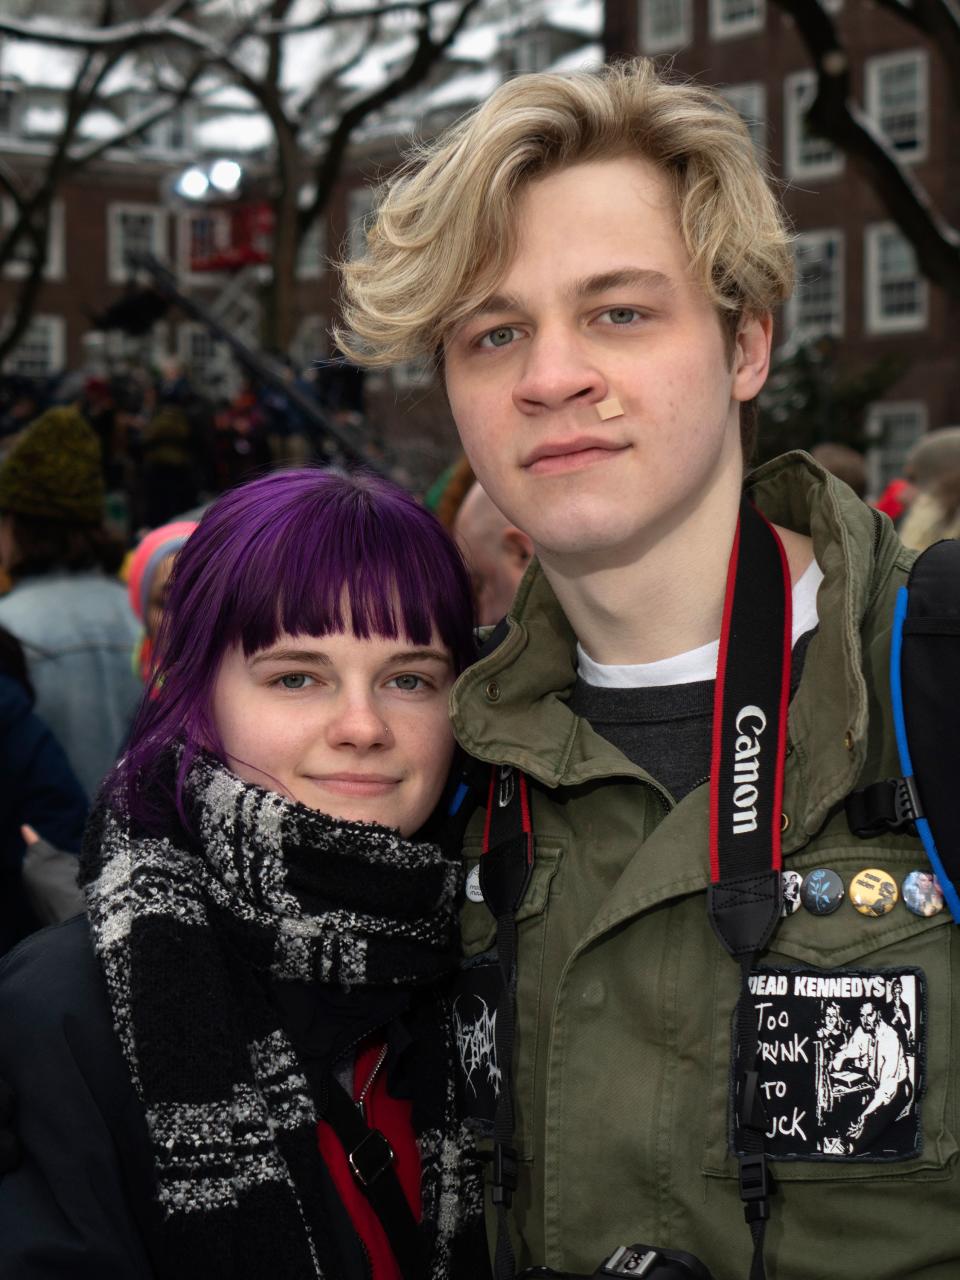 Wells, with Ally, both freshmen at NYU: “We came down because she’s subscribed to the [Sanders] email list so we got an email. . .Bernie is the candidate I’m most excited for in the Democratic primary. There are others that I’m hopeful about like [Elizabeth Warren], but when it comes to actual left-wing politics from someone who has a chance of winning, I don’t think anybody has a better chance than Bernie."